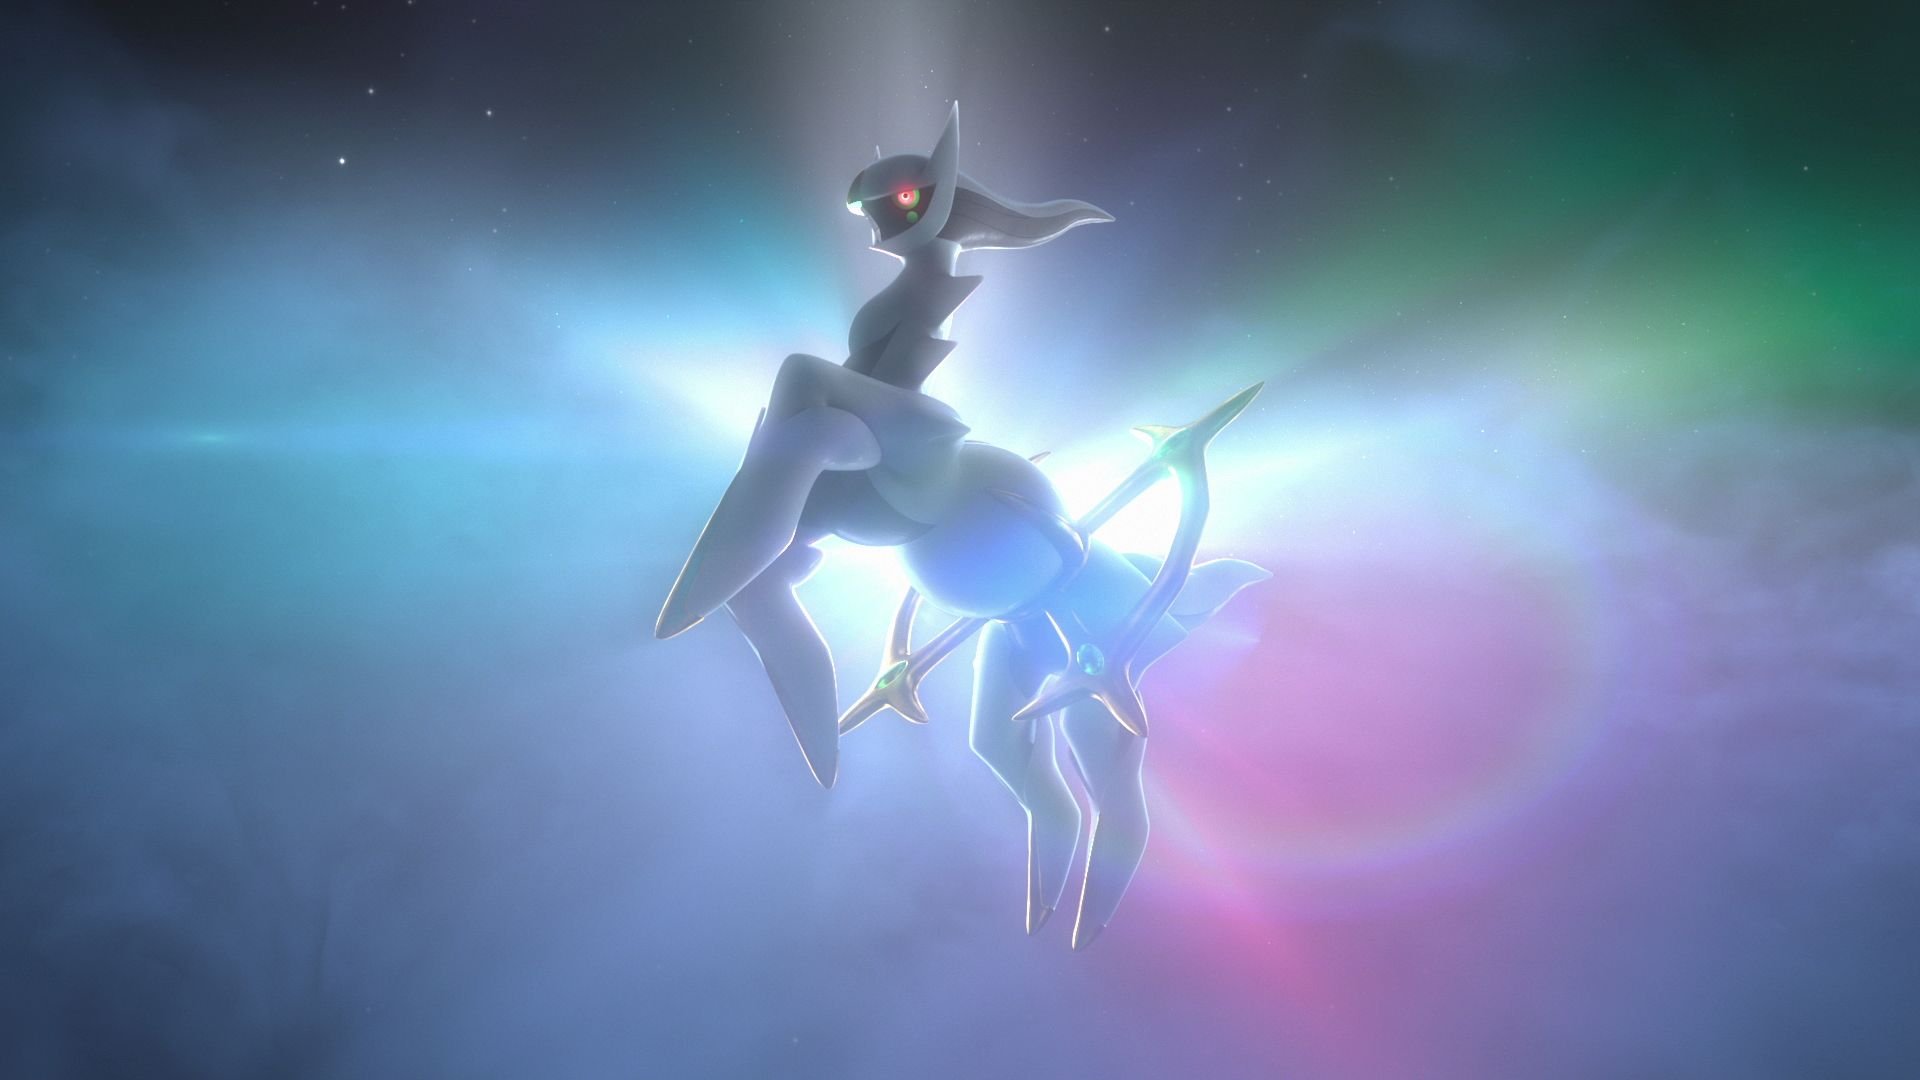 Screenshot of Arceus in 'Pokémon: Legends Arceus'. It's standing on its back legs and surrounded by colors.